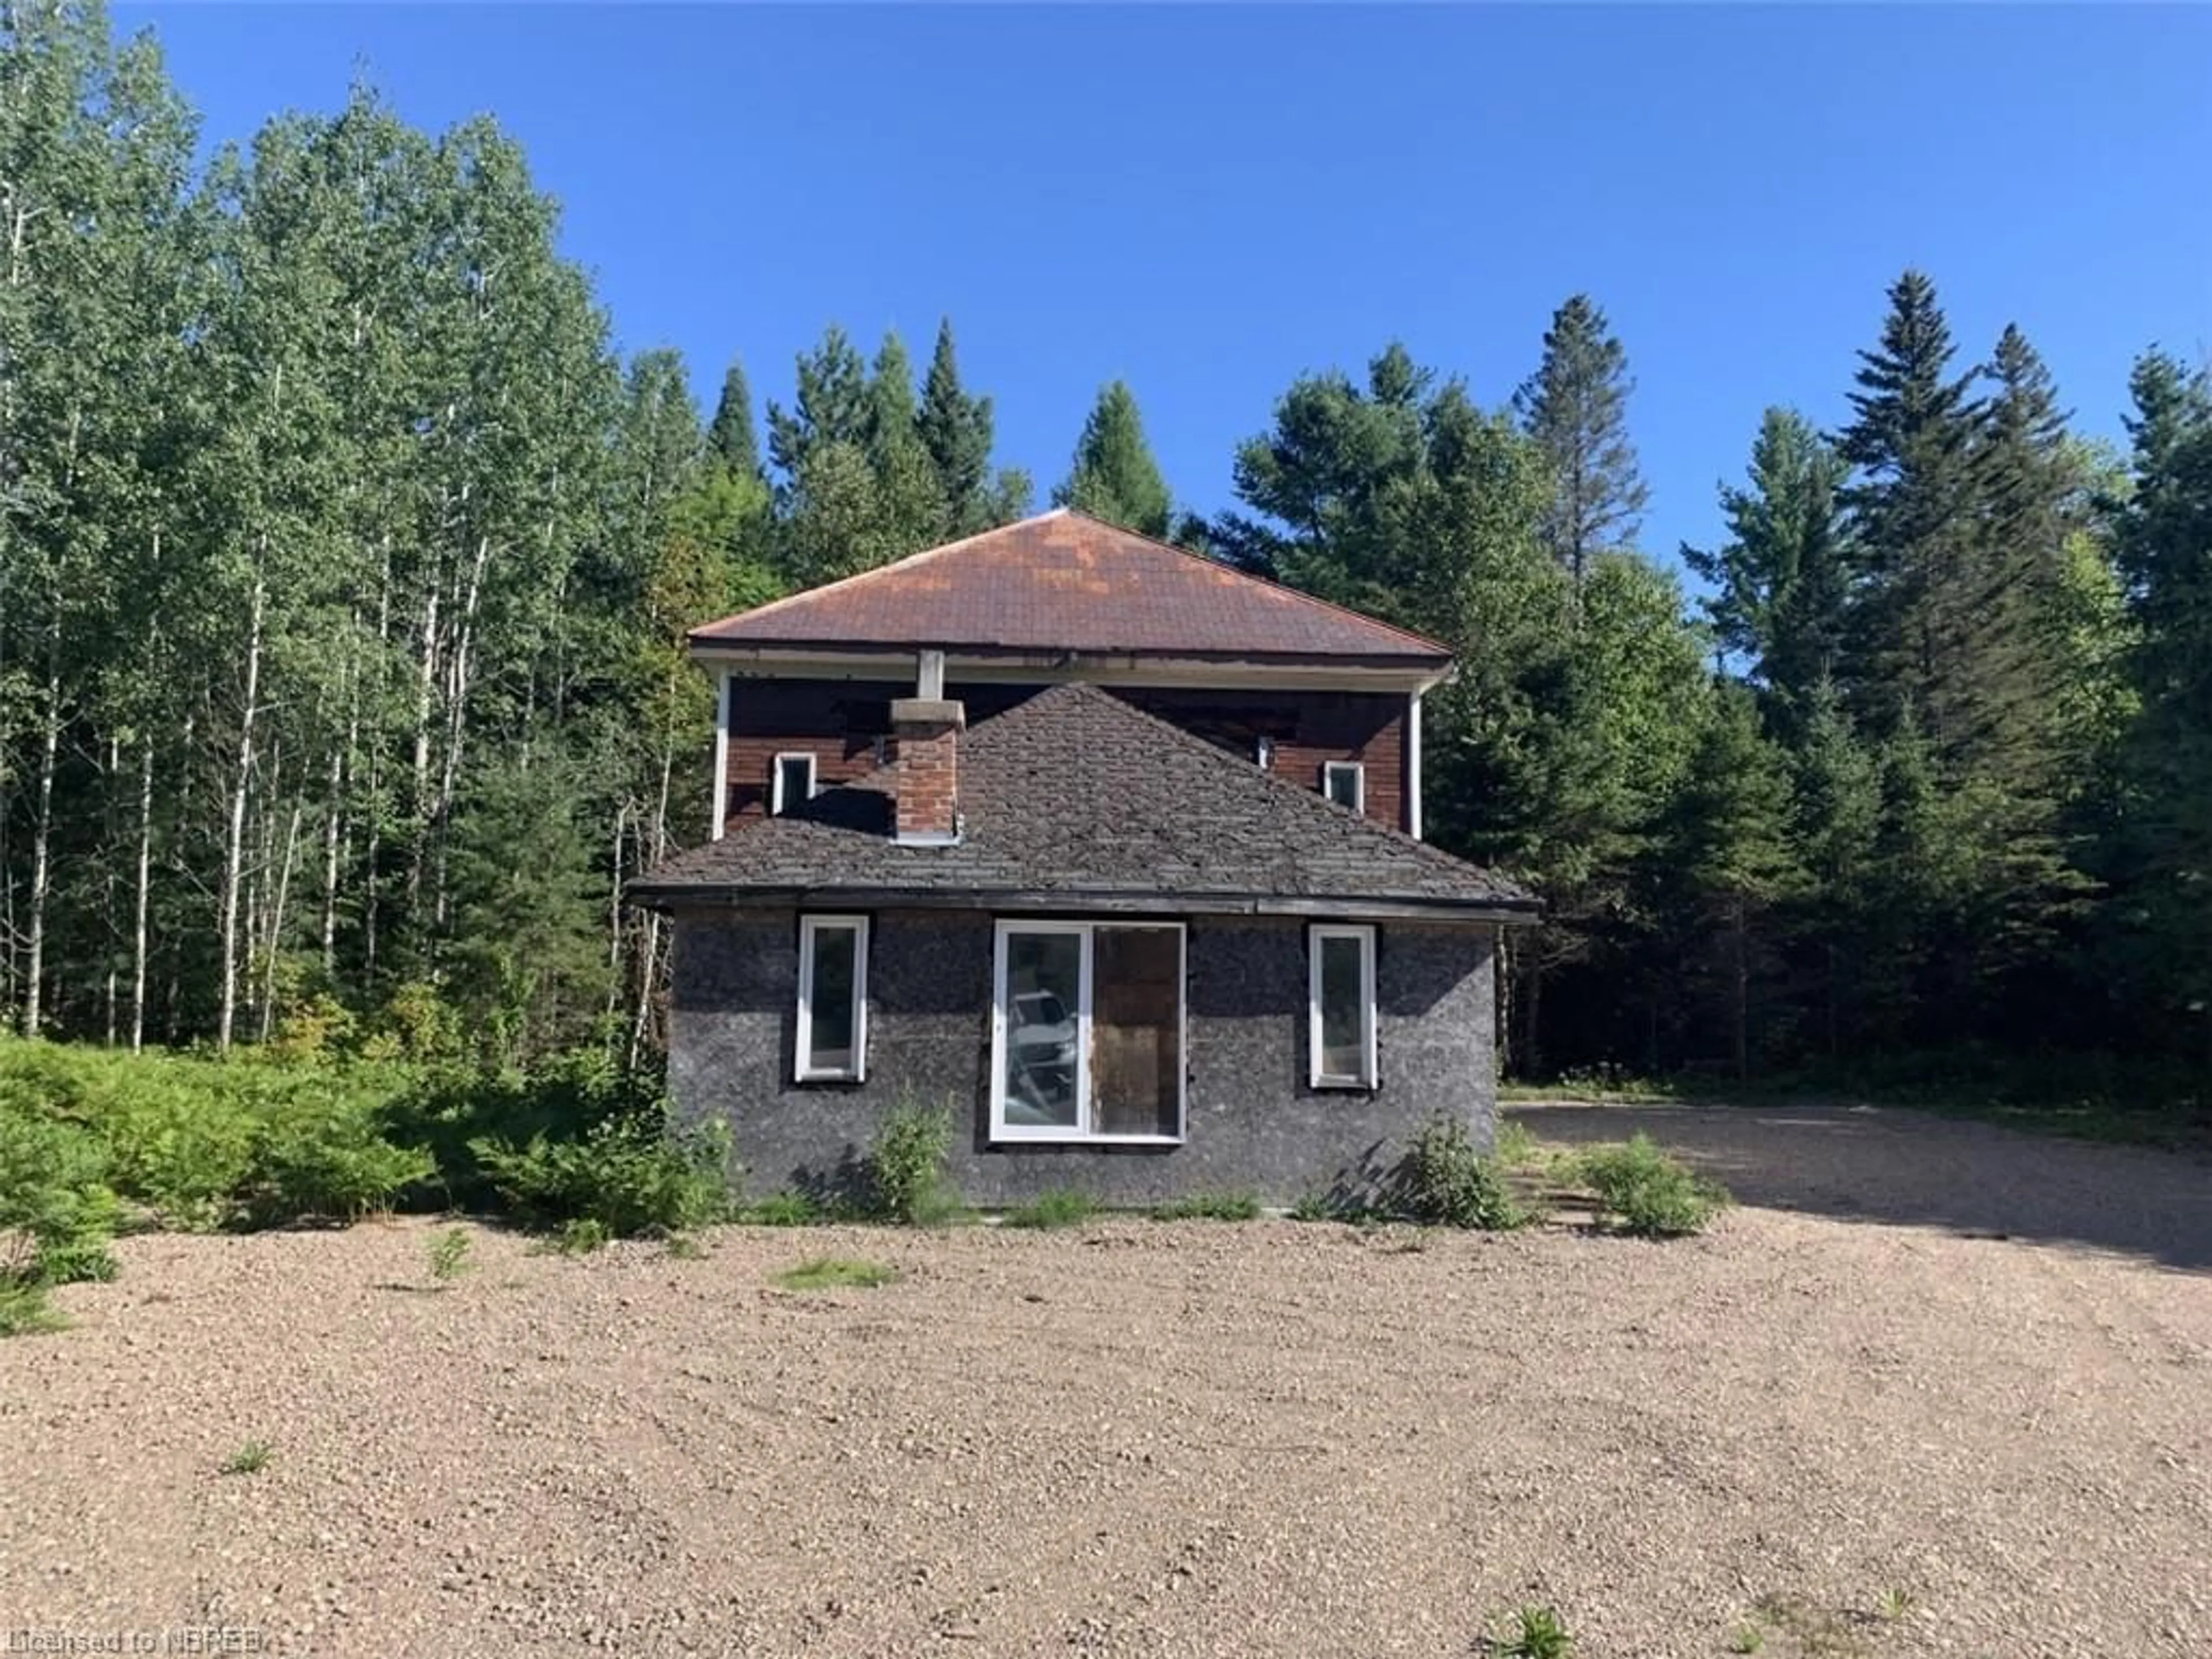 Frontside or backside of a home for 3233 Hwy 17, Mattawa Ontario P0H 1V0